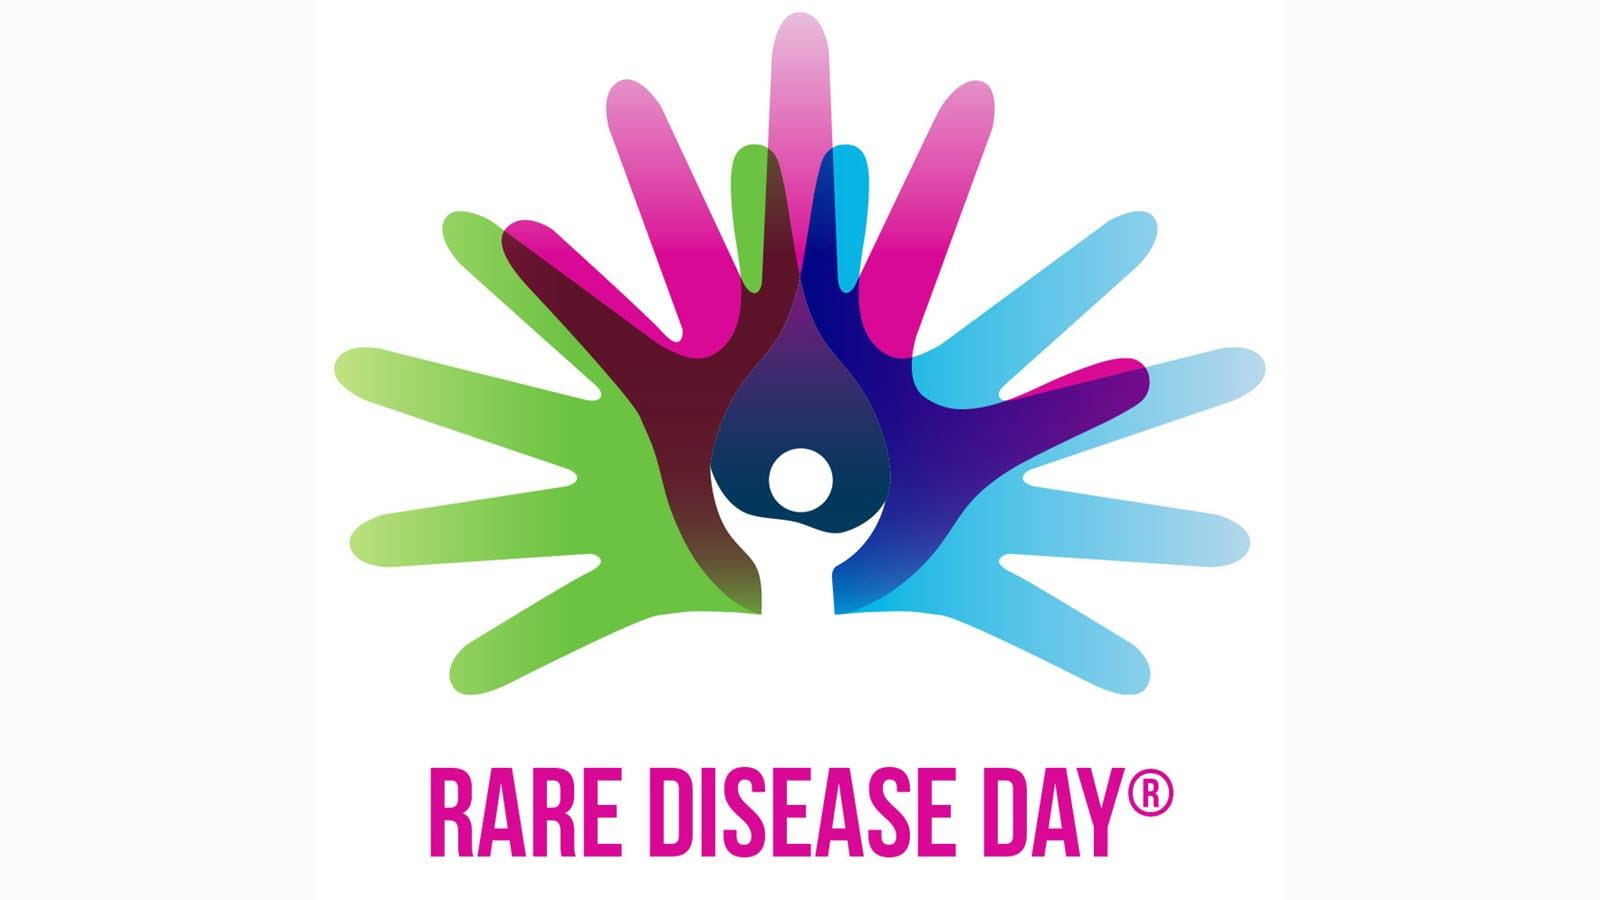 Rare Disease Day logo with hand silhouettes in green, pink, purple and blue